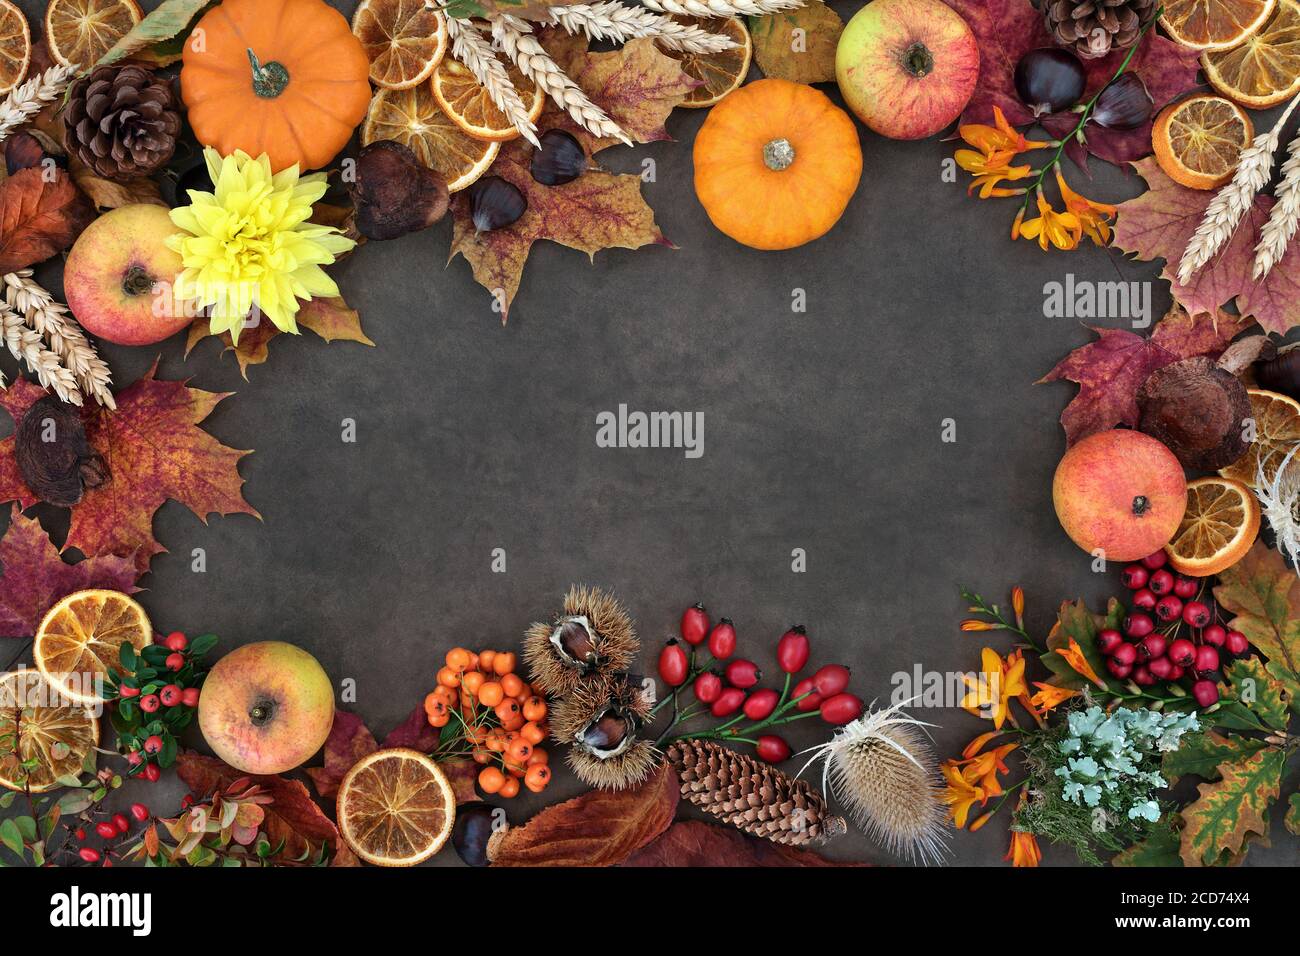 Autumn nature study background border composition with food, flora and fauna on lokta background. Harvest festival theme. Top view. Stock Photo